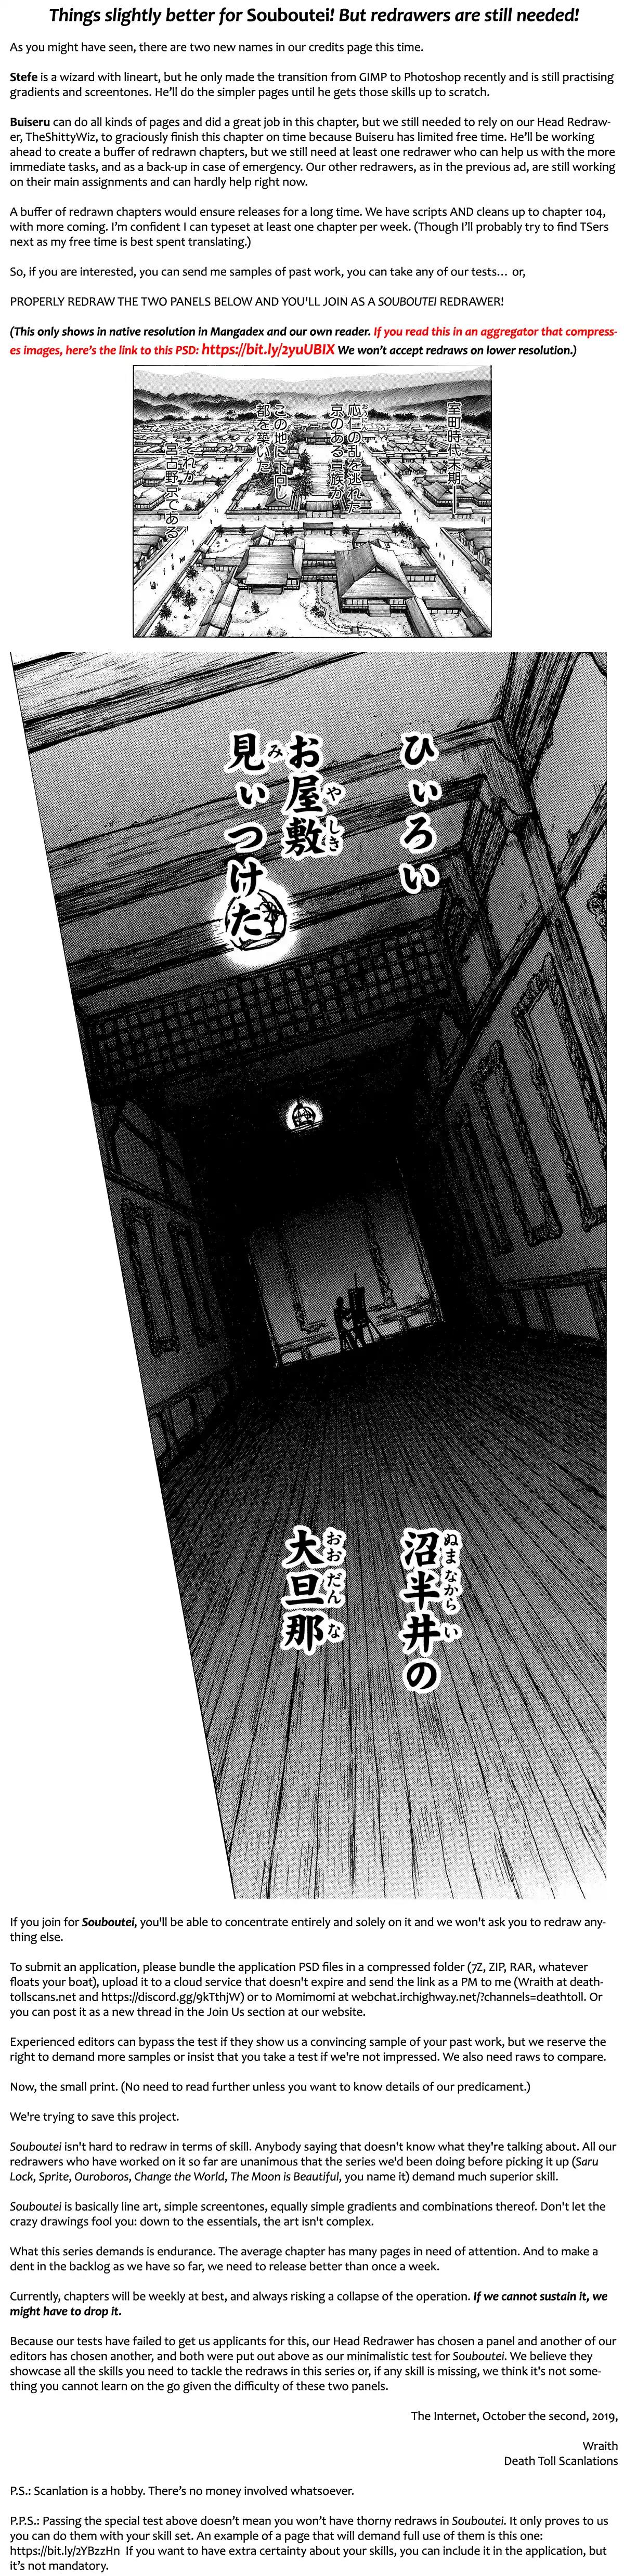 Souboutei Must Be Destroyed Chapter 87: